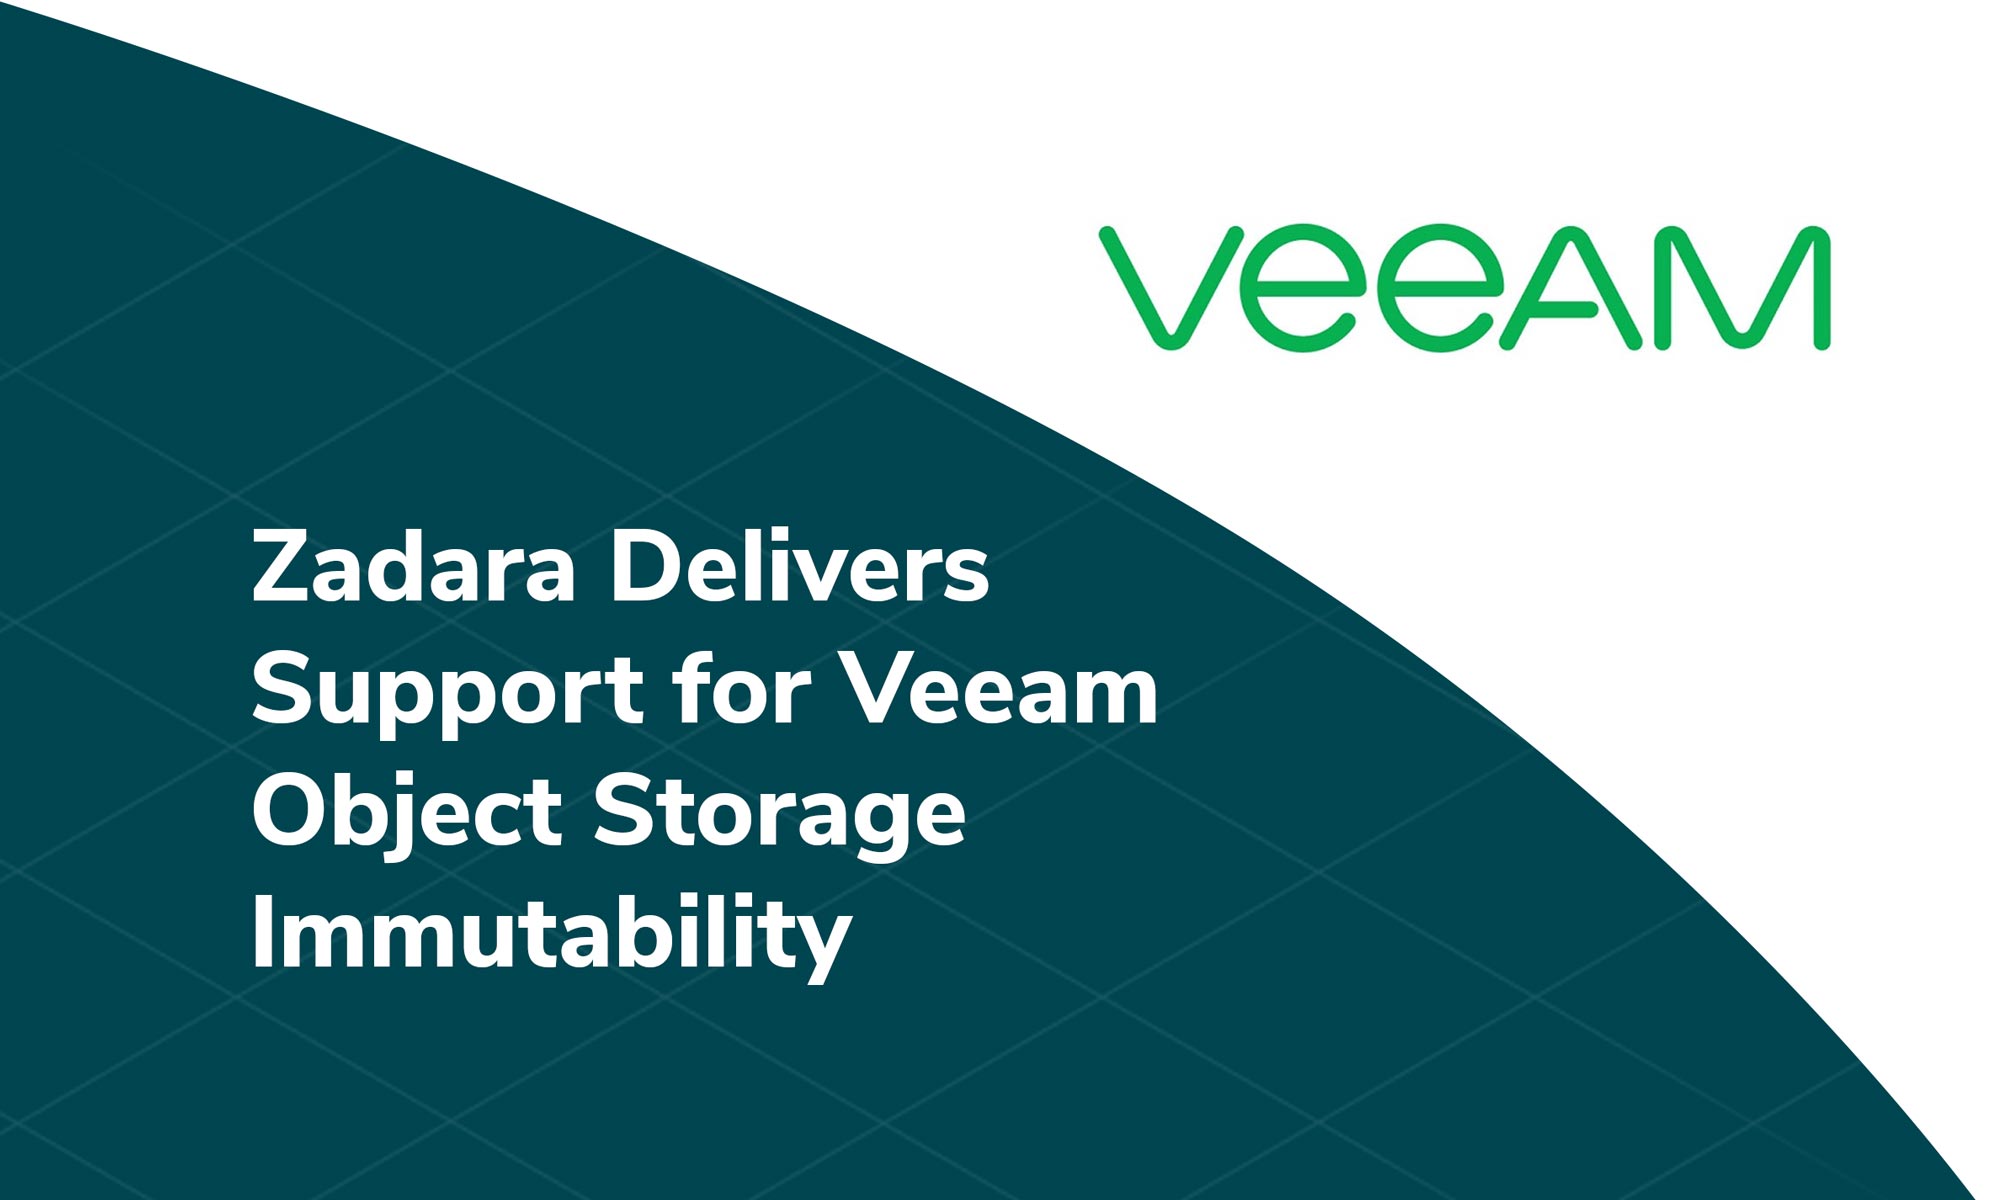 Zadara Delivers Support for Veeam Object Storage Immutability